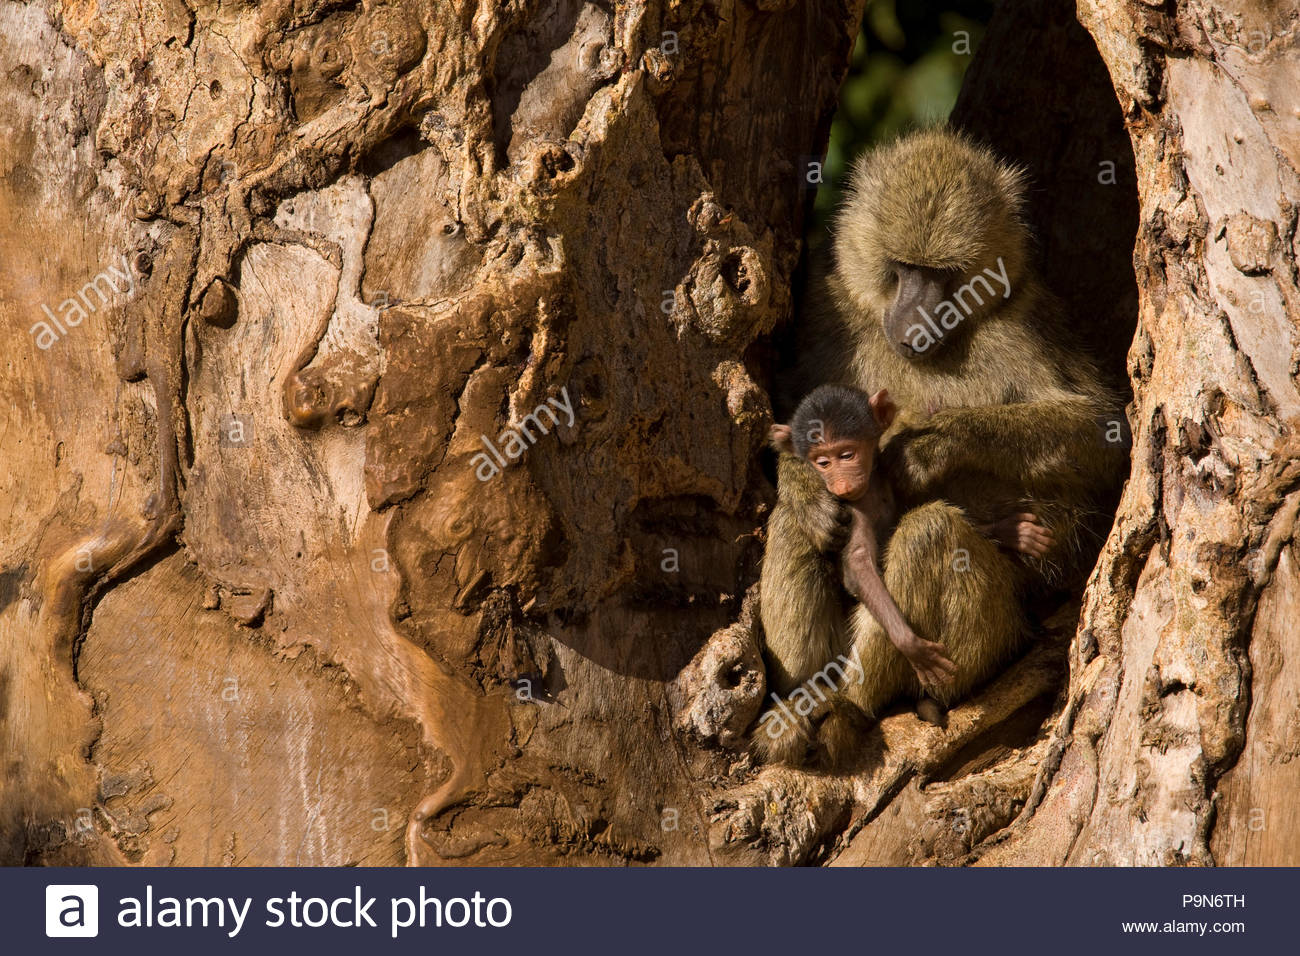 Adult olive baboon and two babies seated in a gnarled tree. Stock Photo